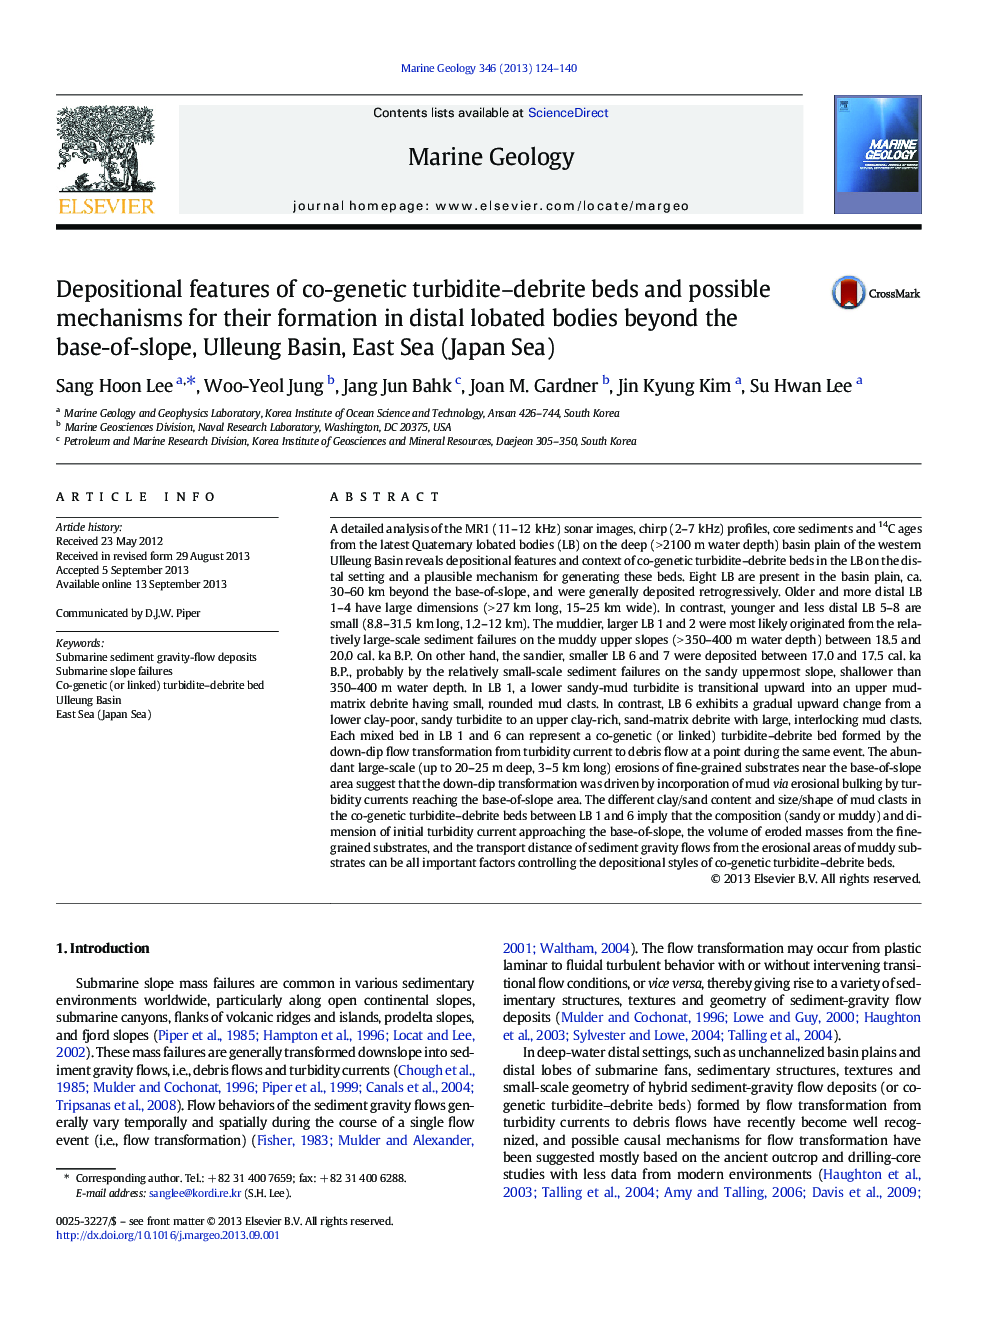 Depositional features of co-genetic turbidite–debrite beds and possible mechanisms for their formation in distal lobated bodies beyond the base-of-slope, Ulleung Basin, East Sea (Japan Sea)